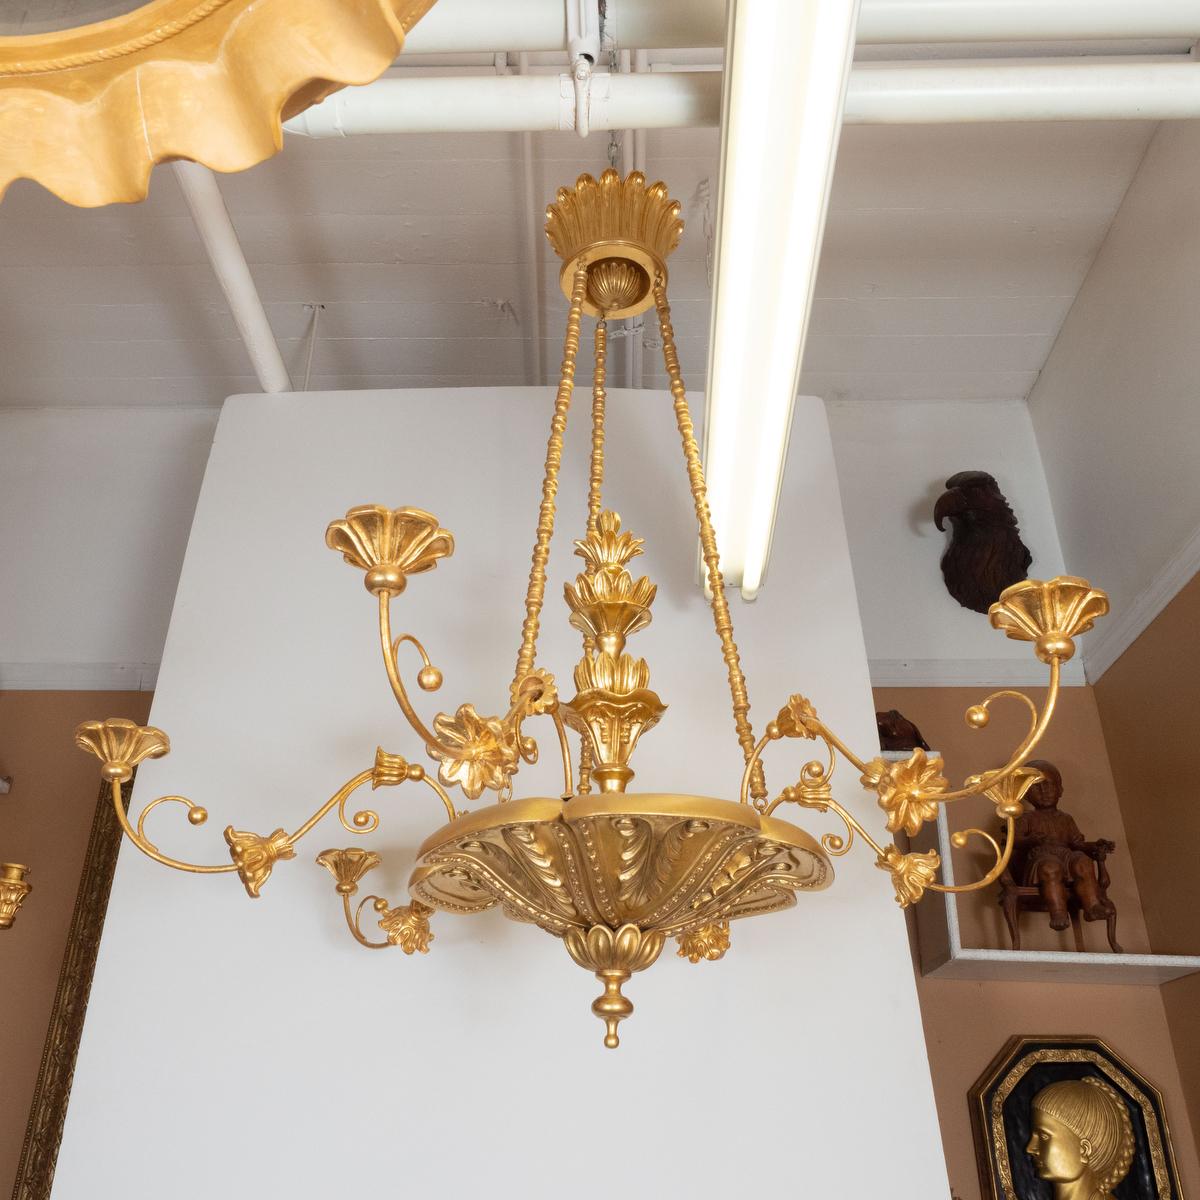 22k gold giltwood woodcarving chandelier with thin tendril arms and foliate motif by master woodworker Carlos Villegas